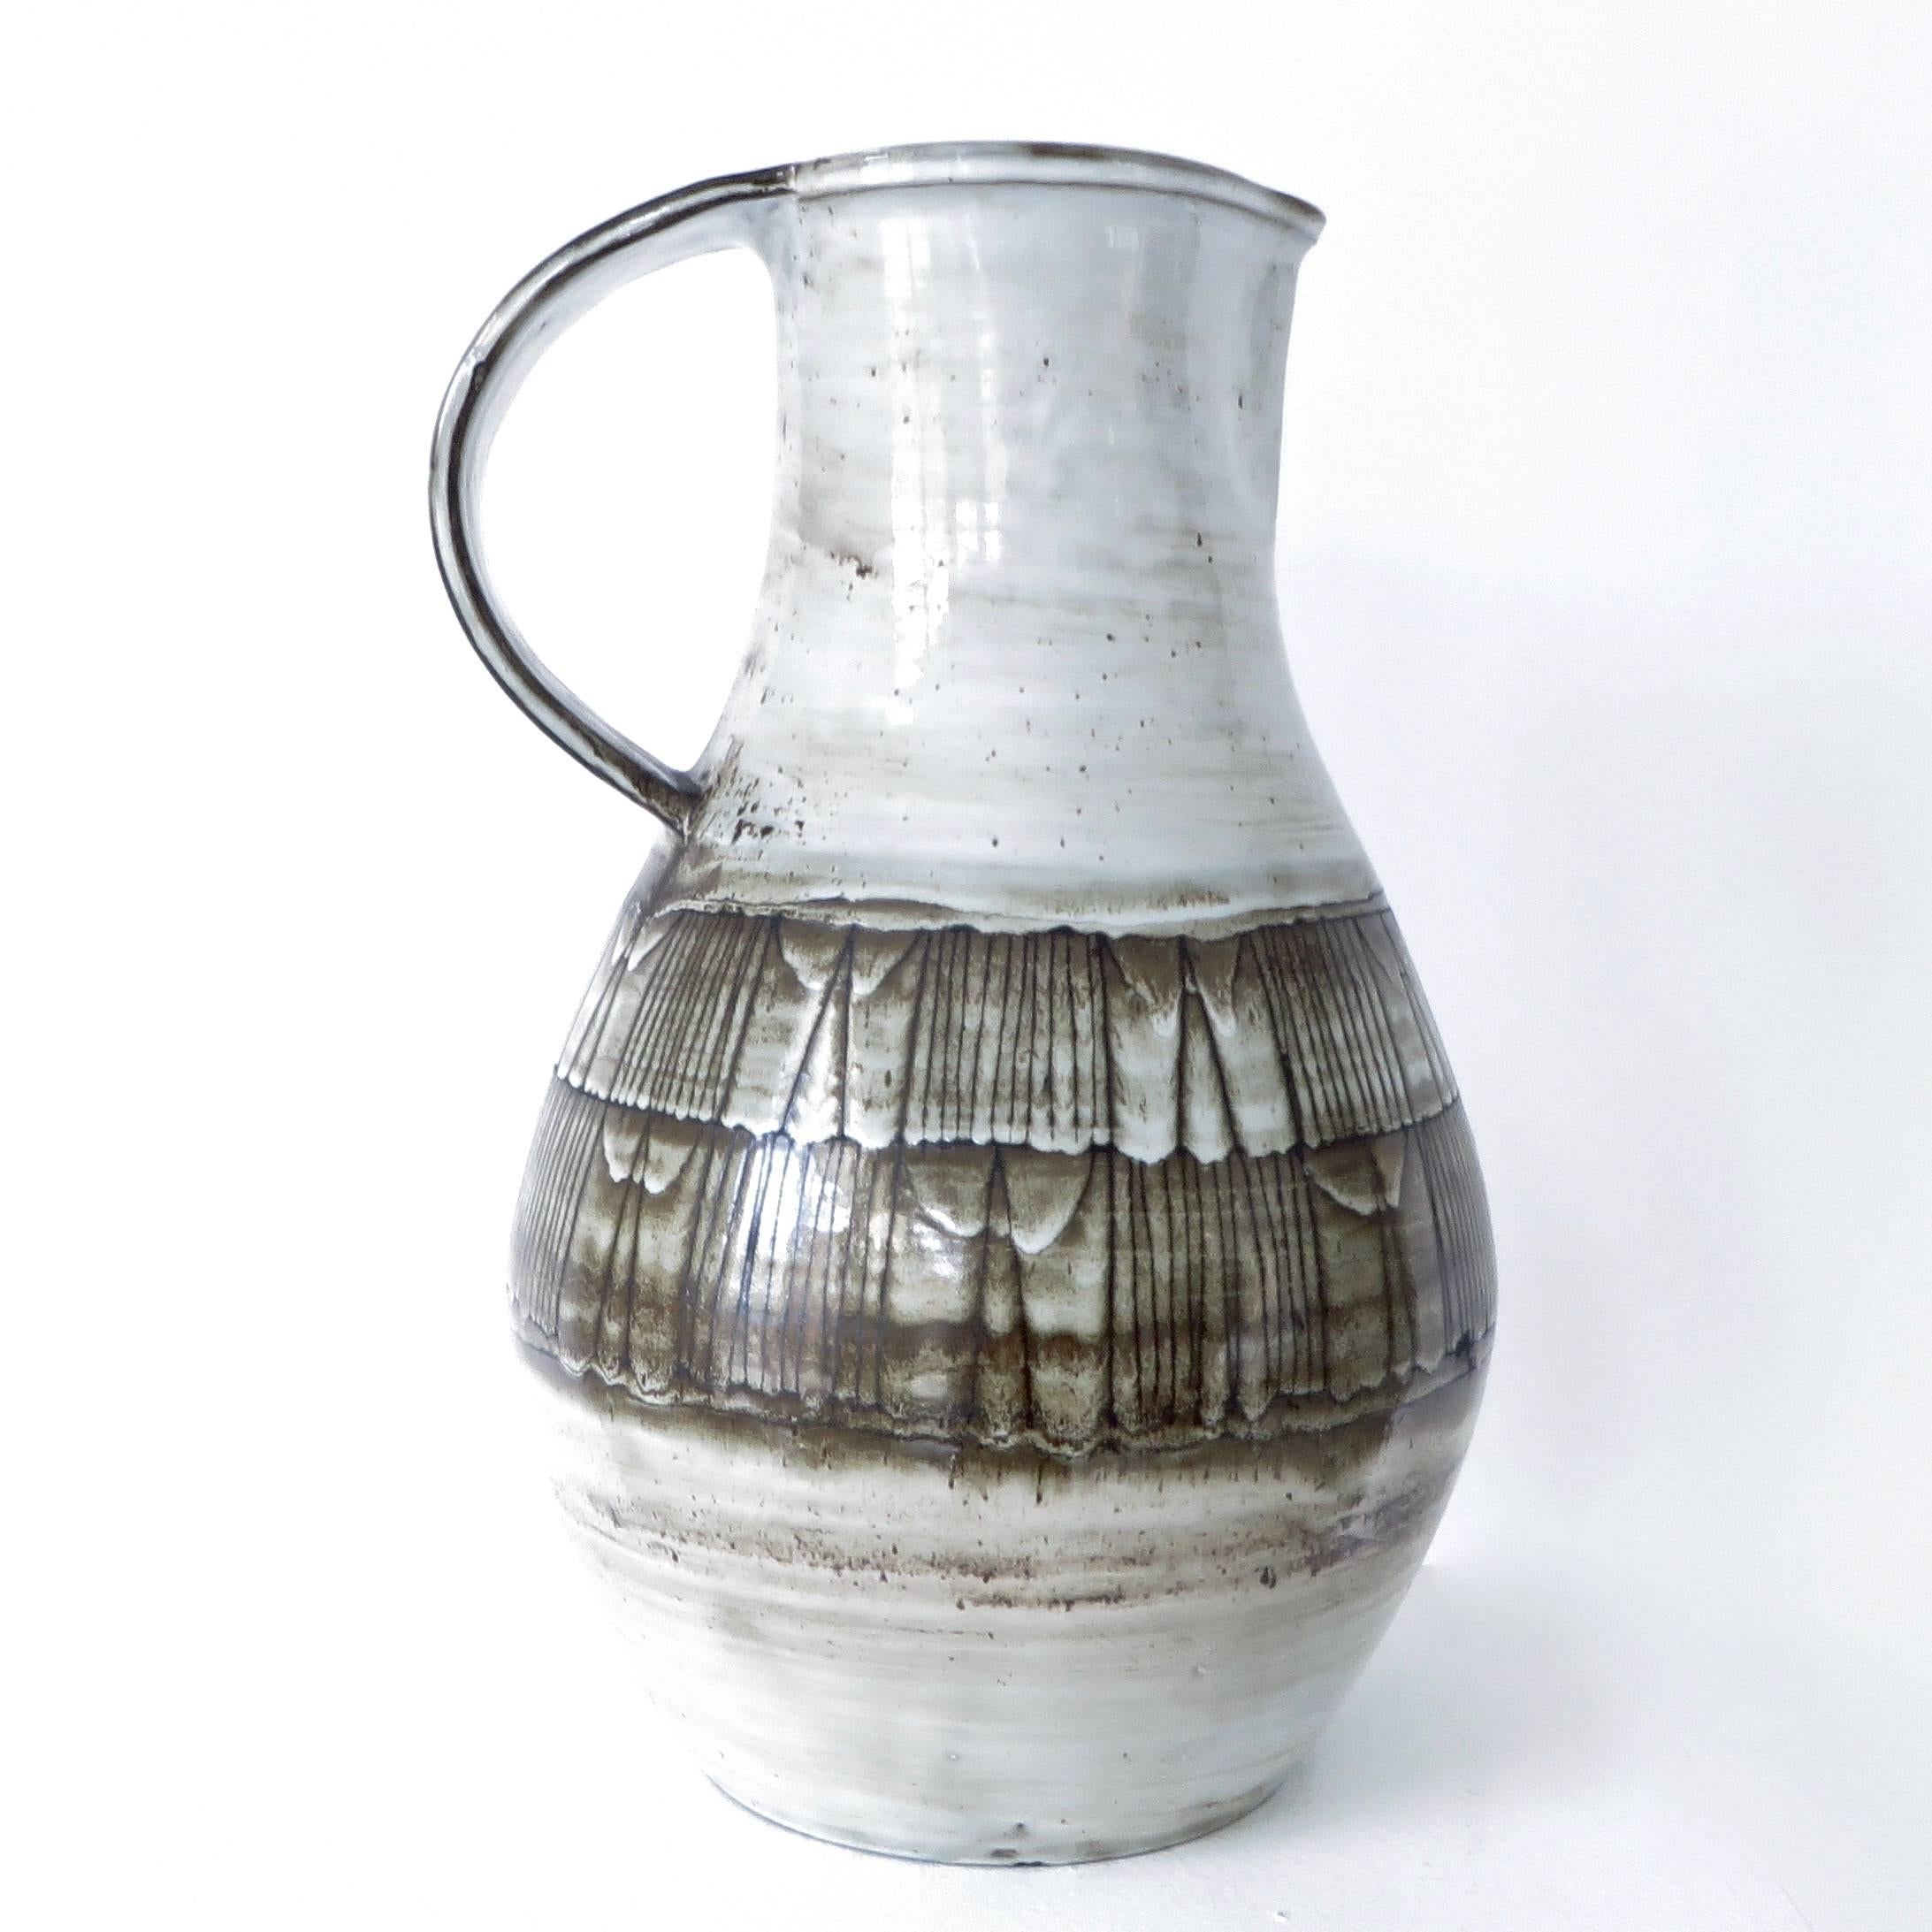 Modern Monumental French Ceramic Pitcher by Jaques Pouchain Atelier Dieulefit